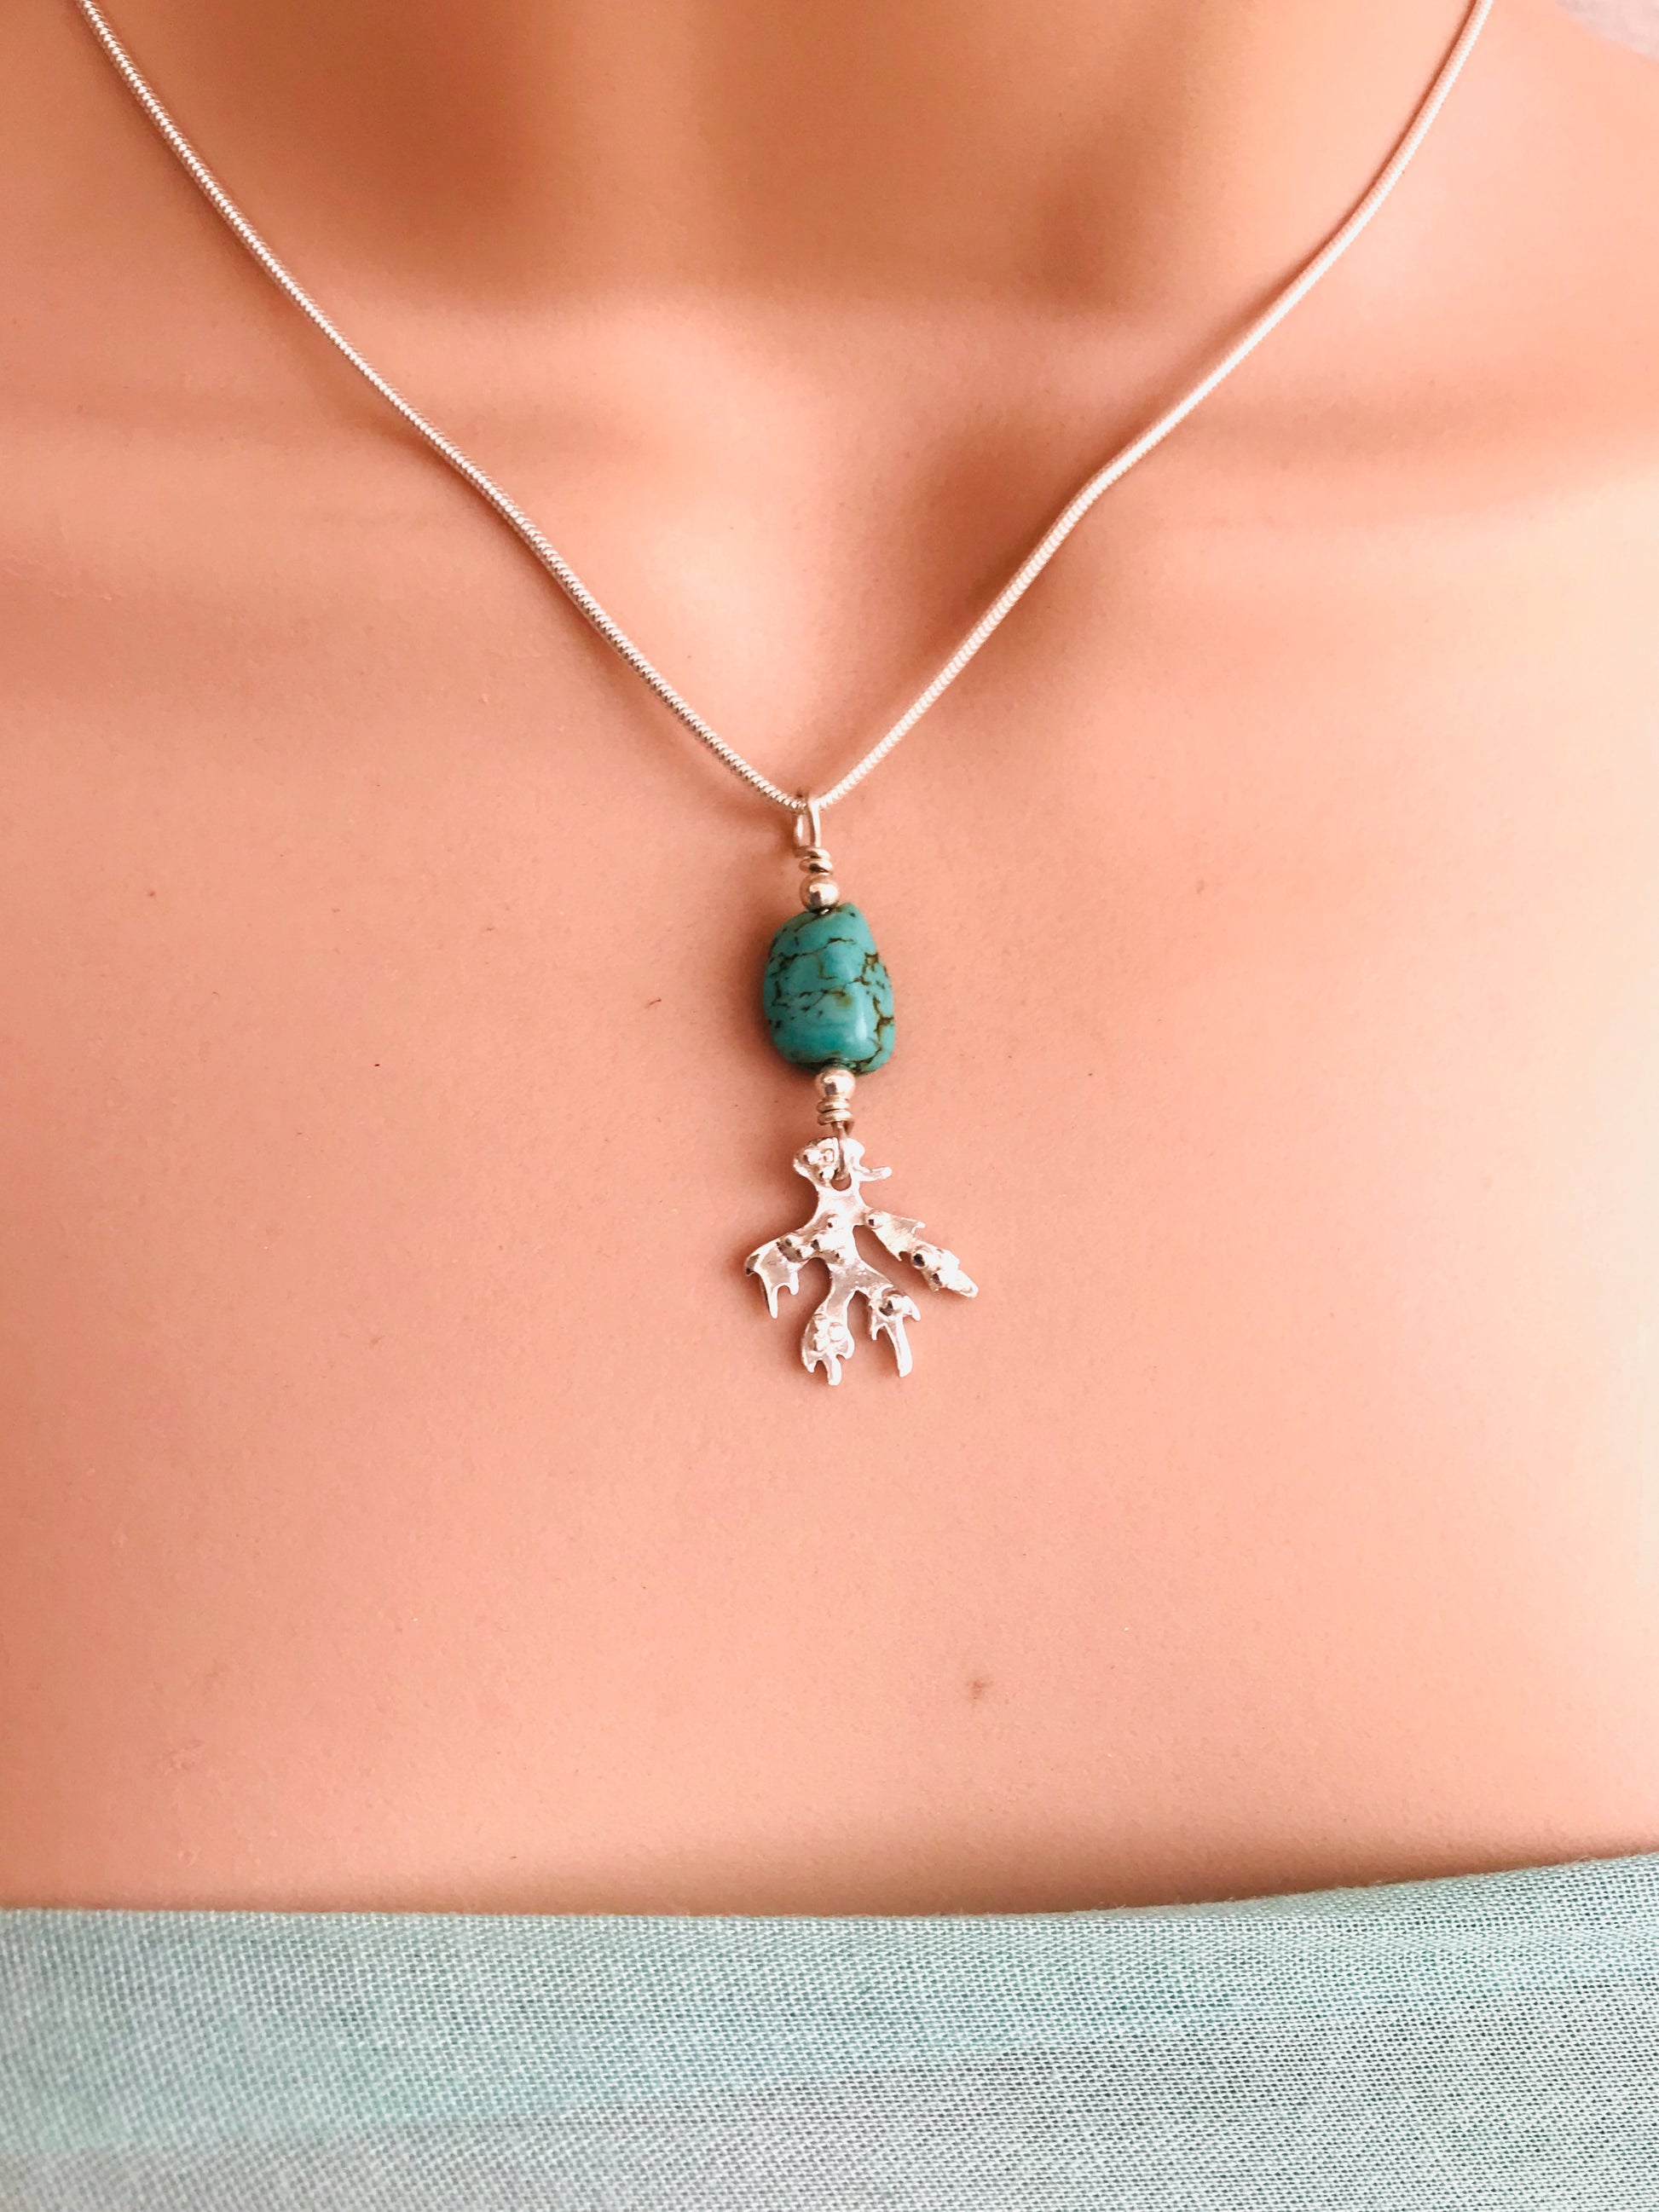 Silver seaweed necklace